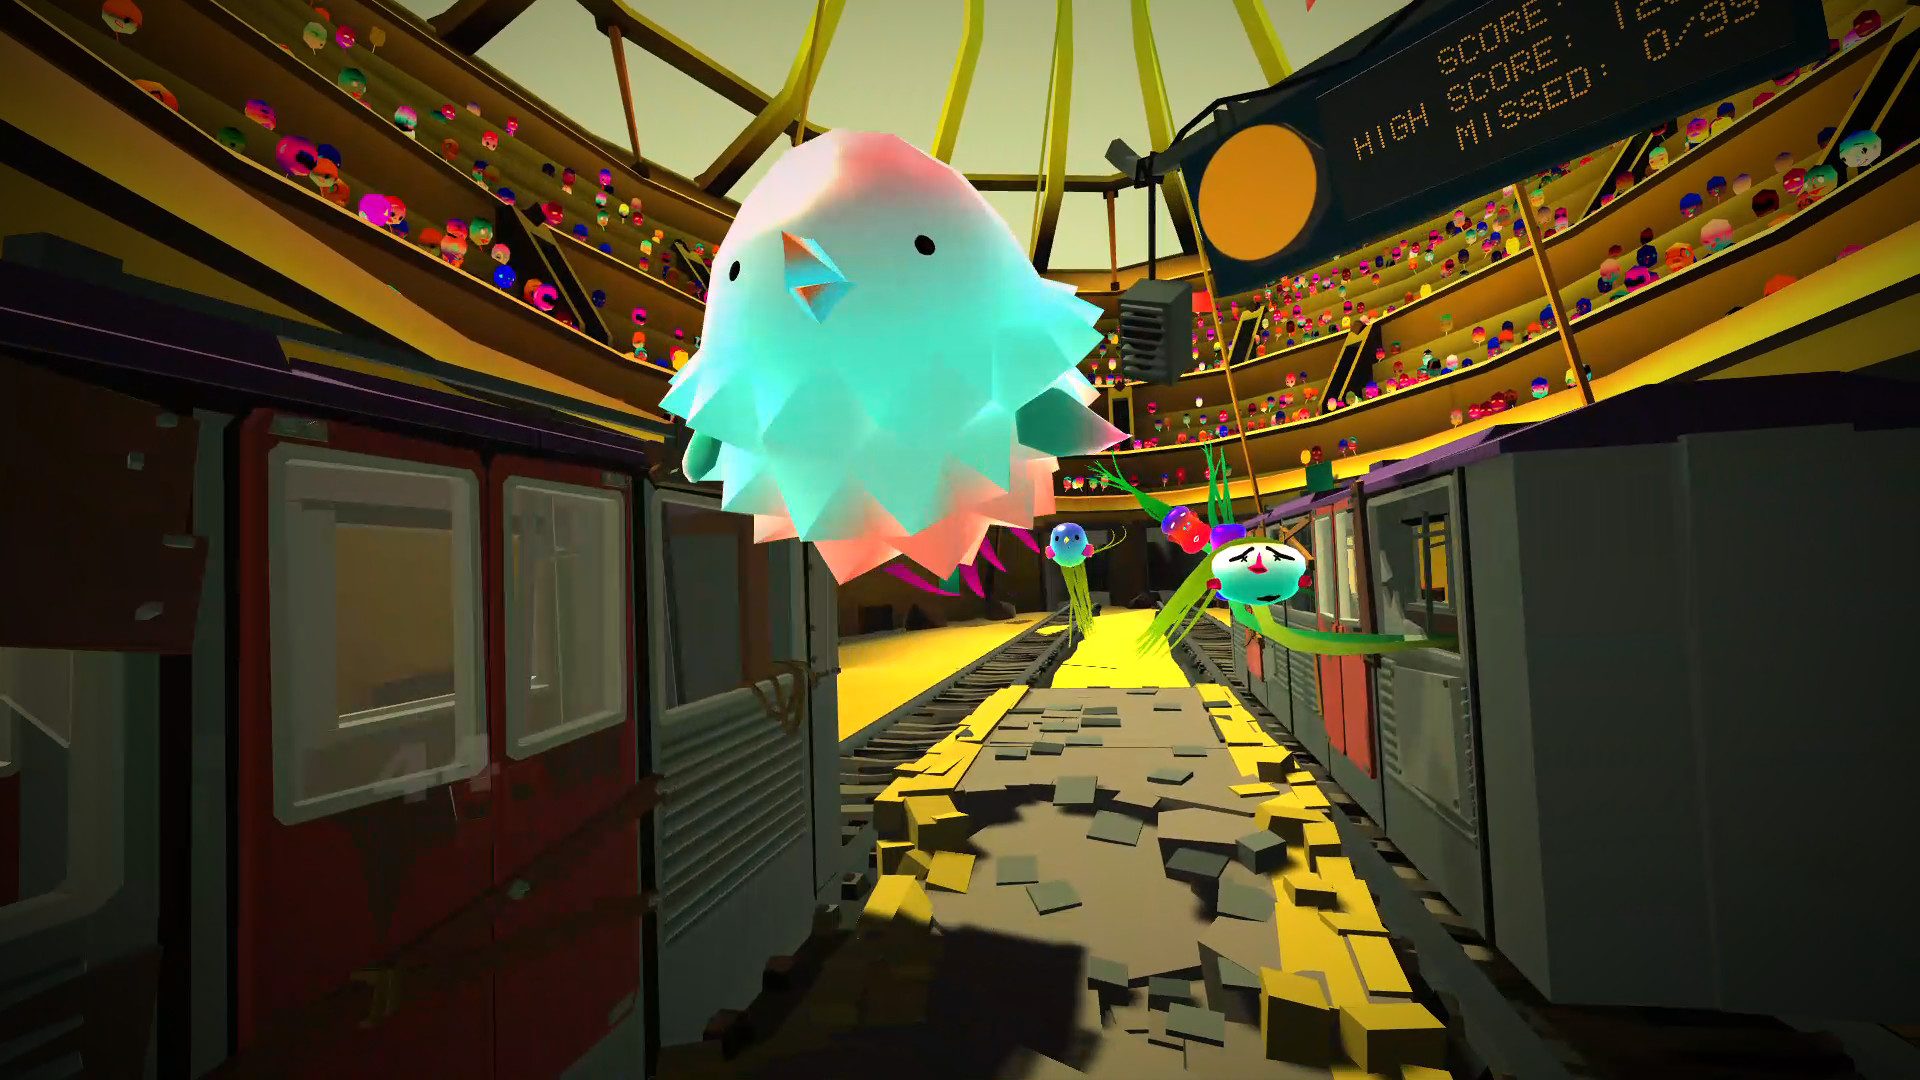 Bizarre Barber' is a Surreal Game About Cutting Hair in a Post-apocalyptic Subway Road VR